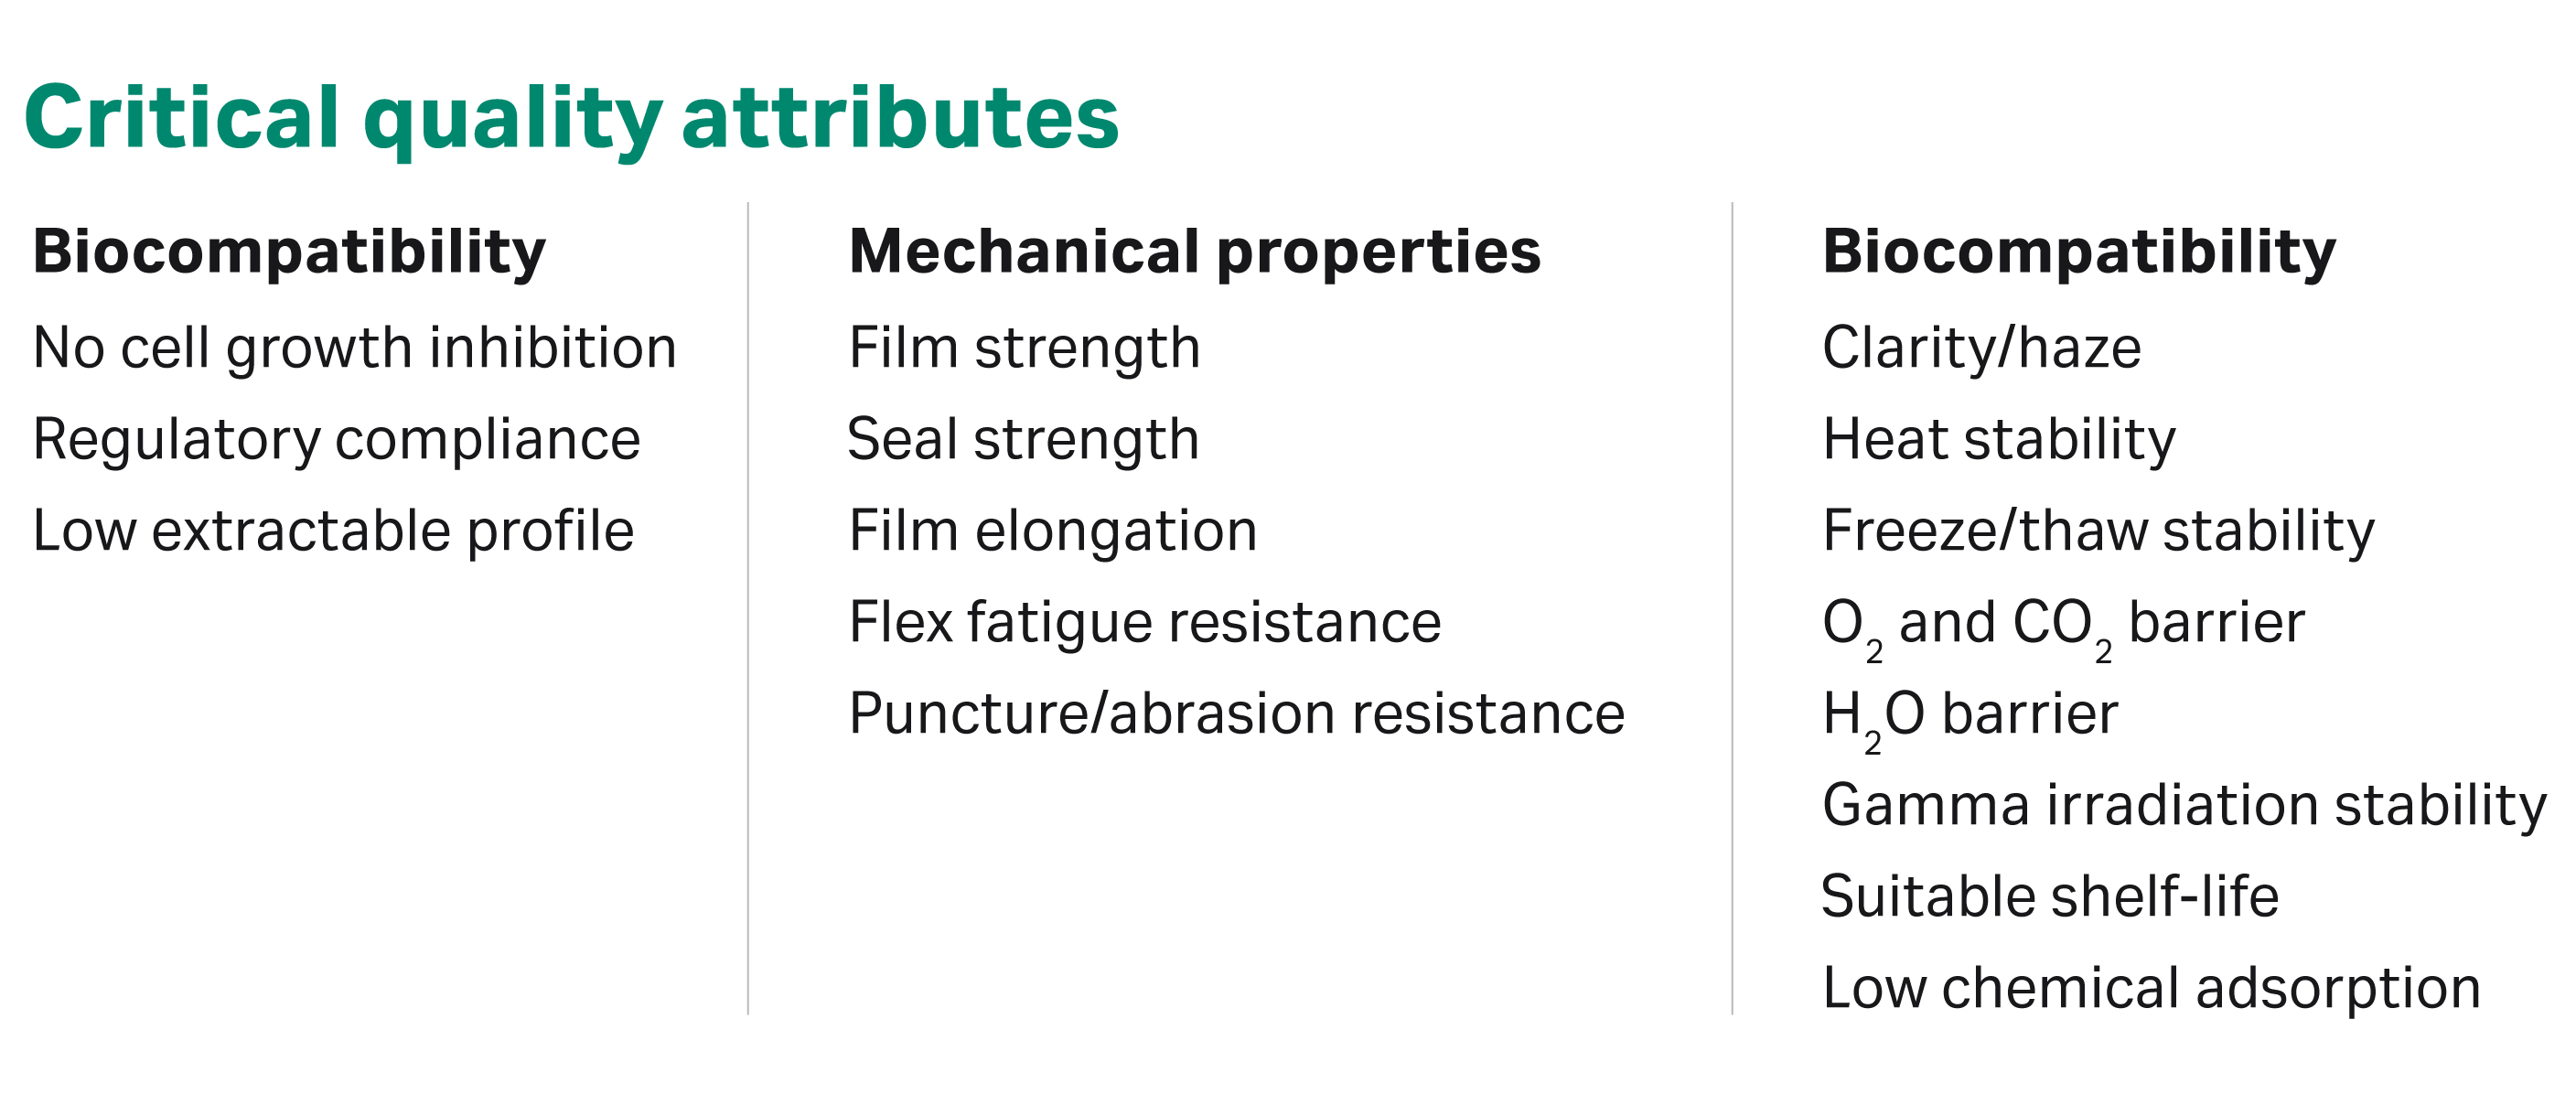 Critical quality attributes of Fortem film